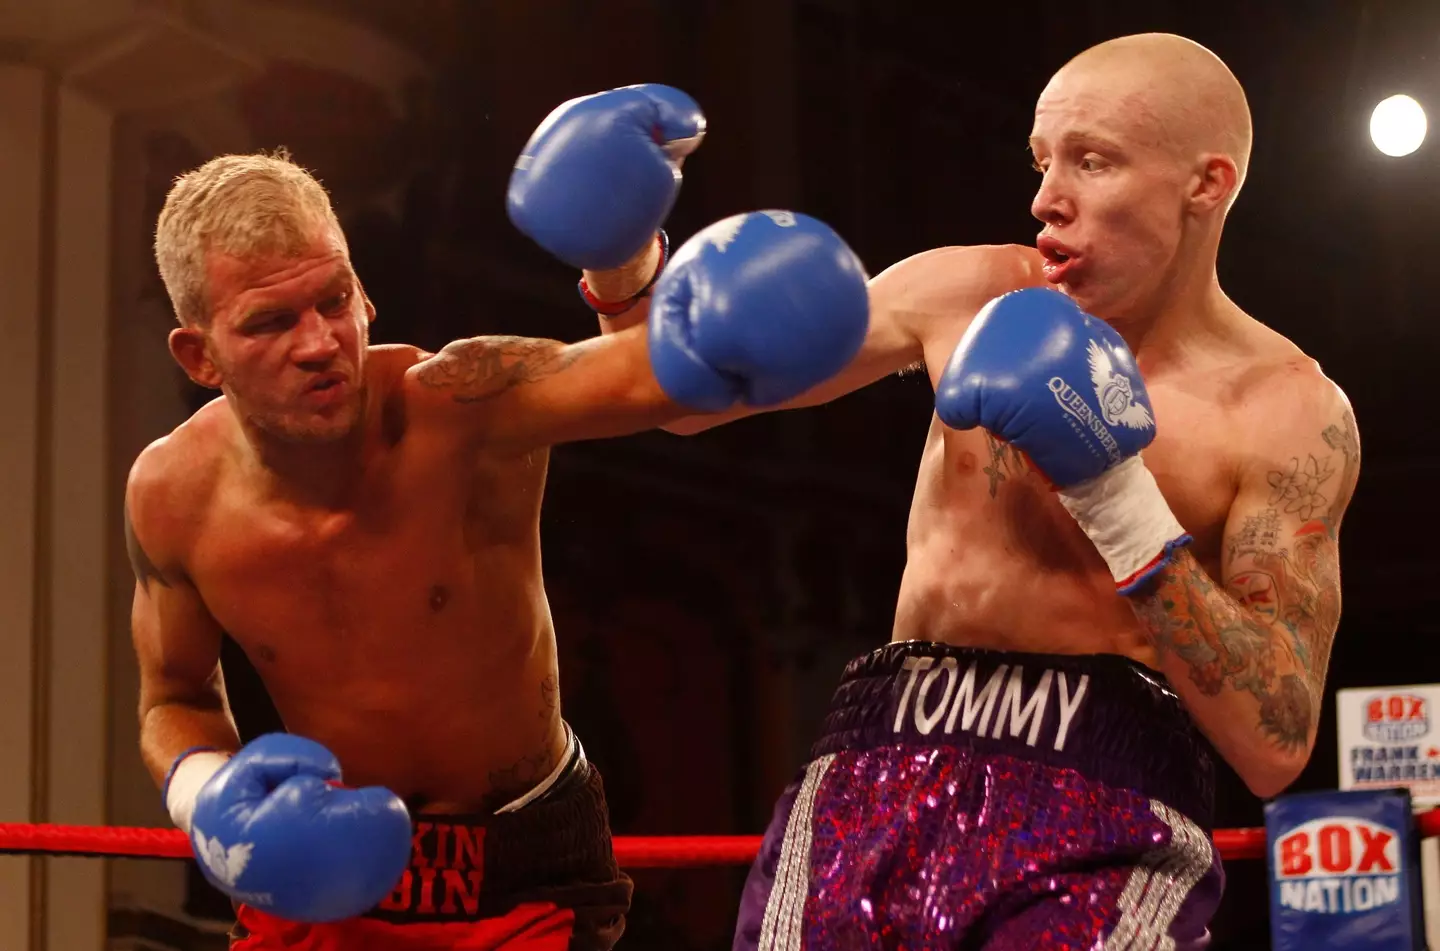 Deakin moved into bare-knuckle fighting after retiring from boxing (Image: Alamy)